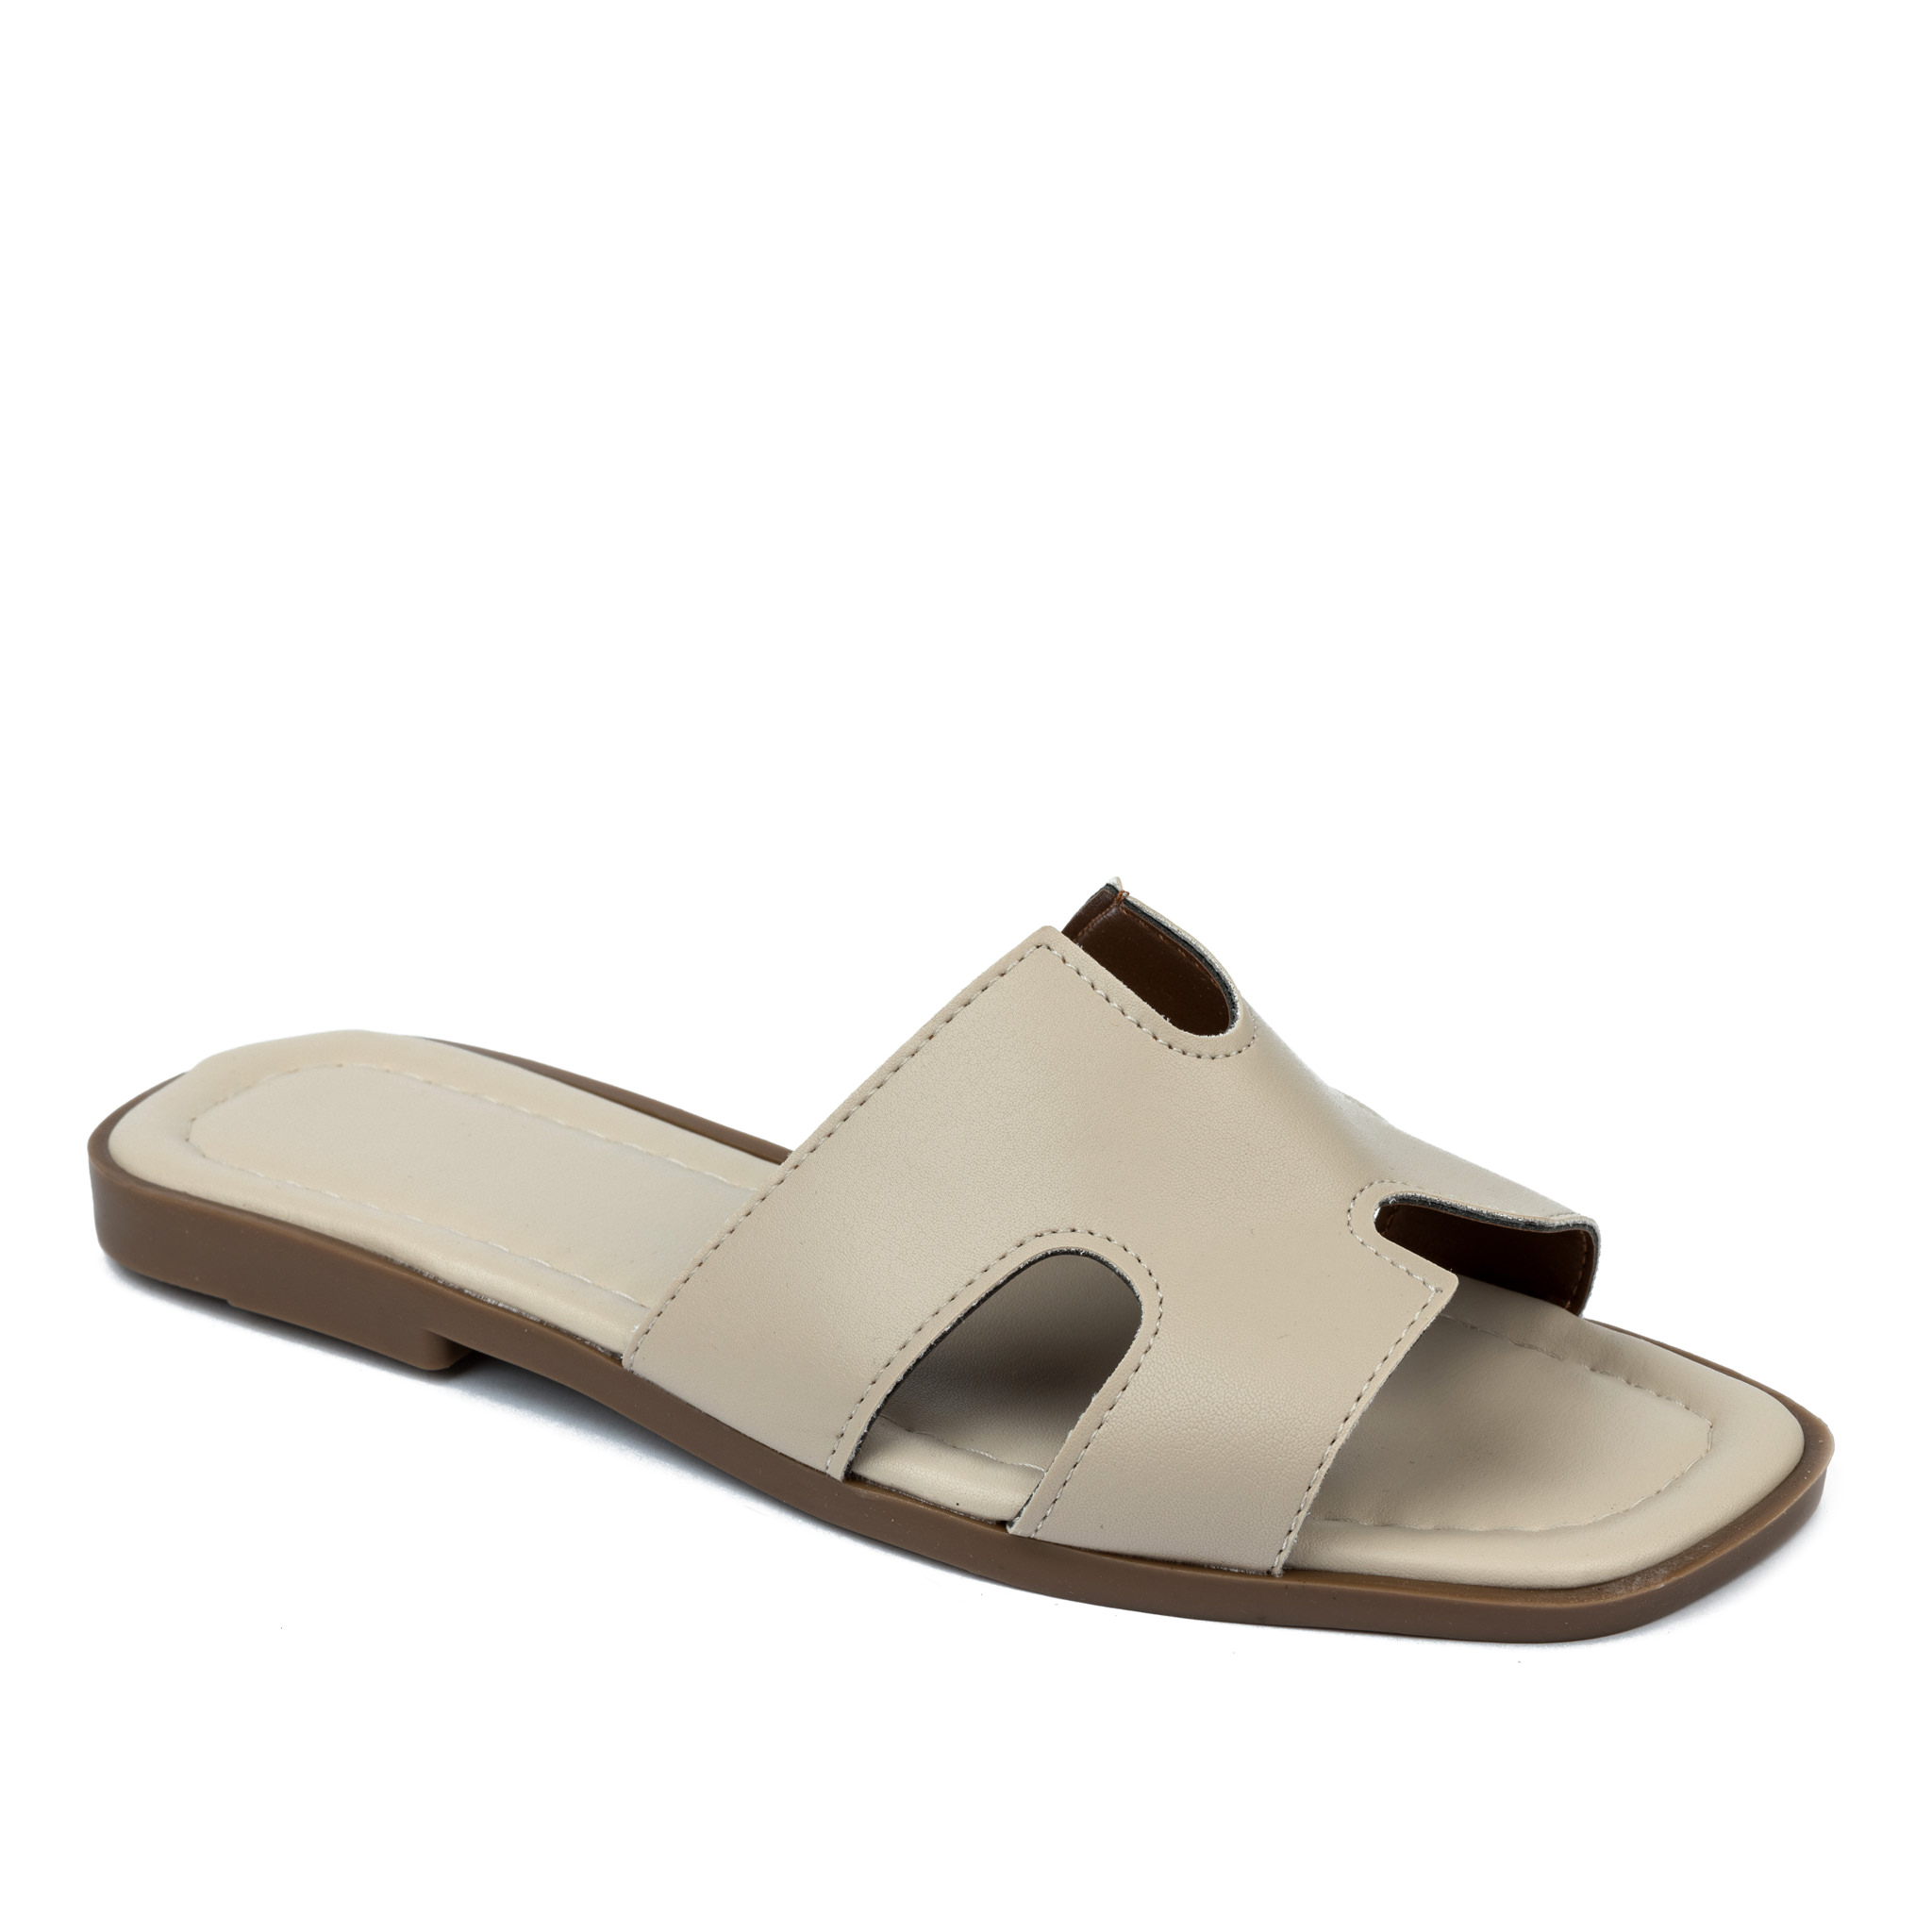 Women Slippers and Mules A549 - BEIGE